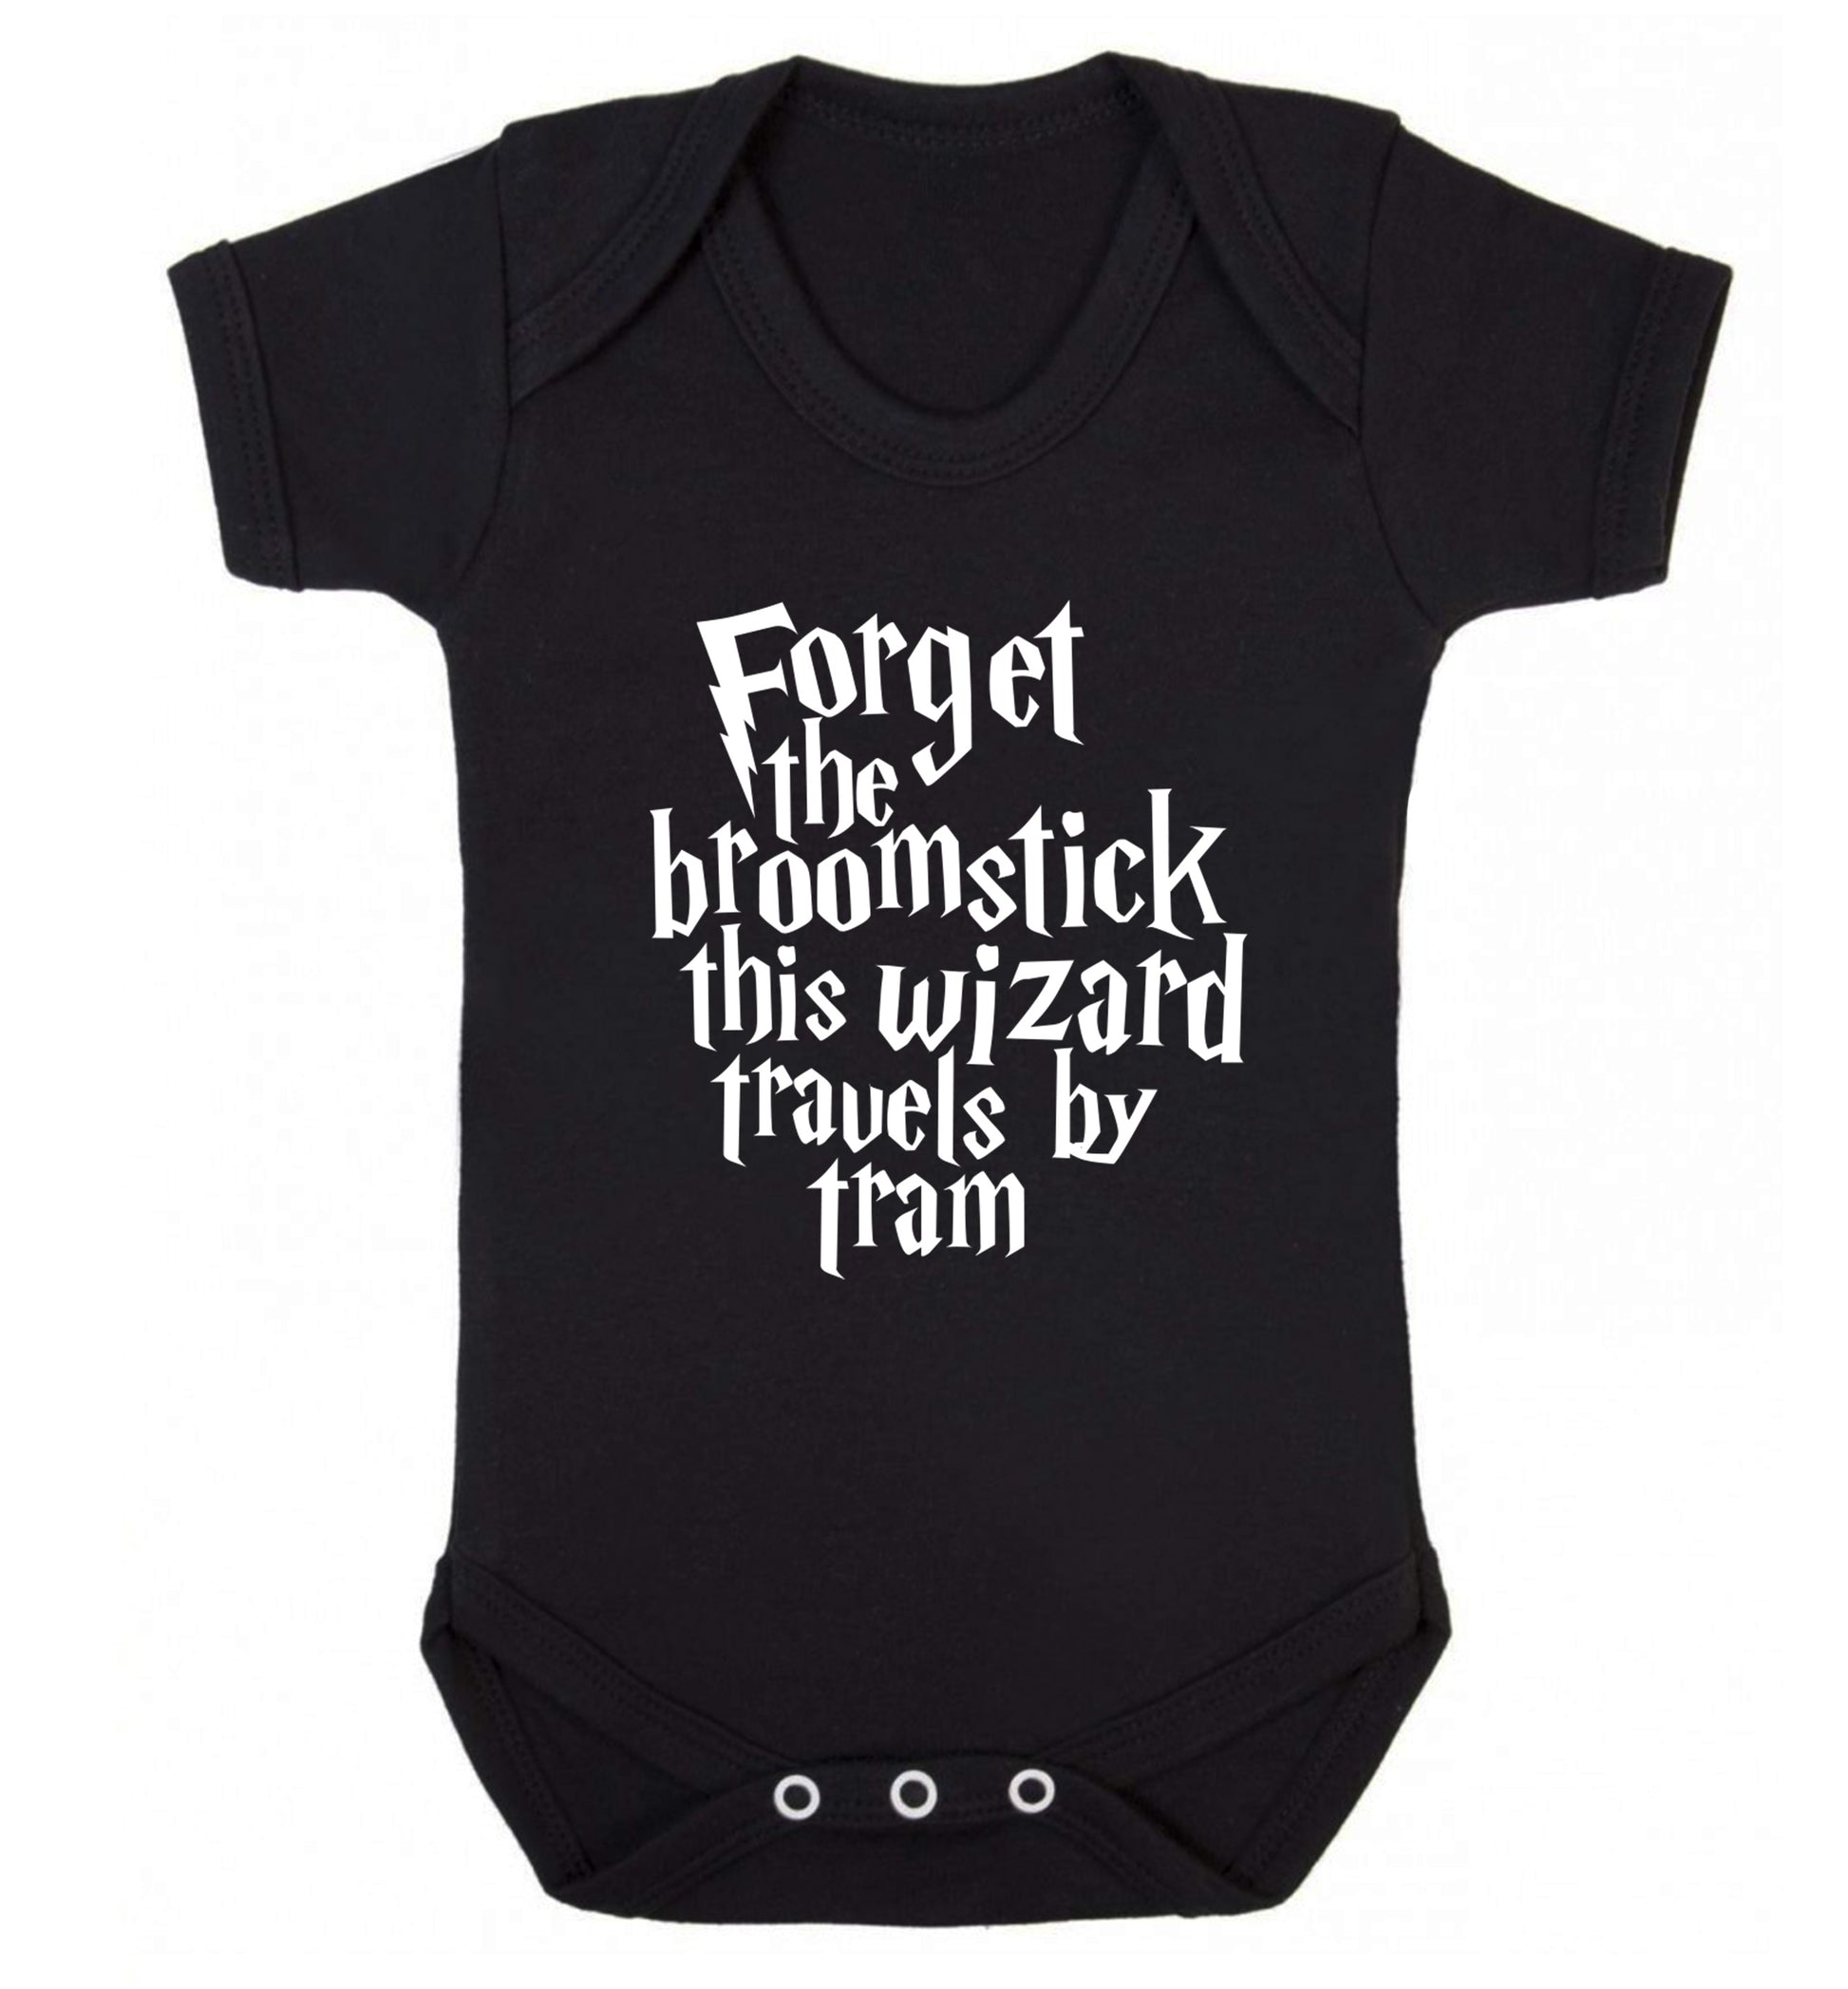 Forget the broomstick this wizard travels by tram Baby Vest black 18-24 months